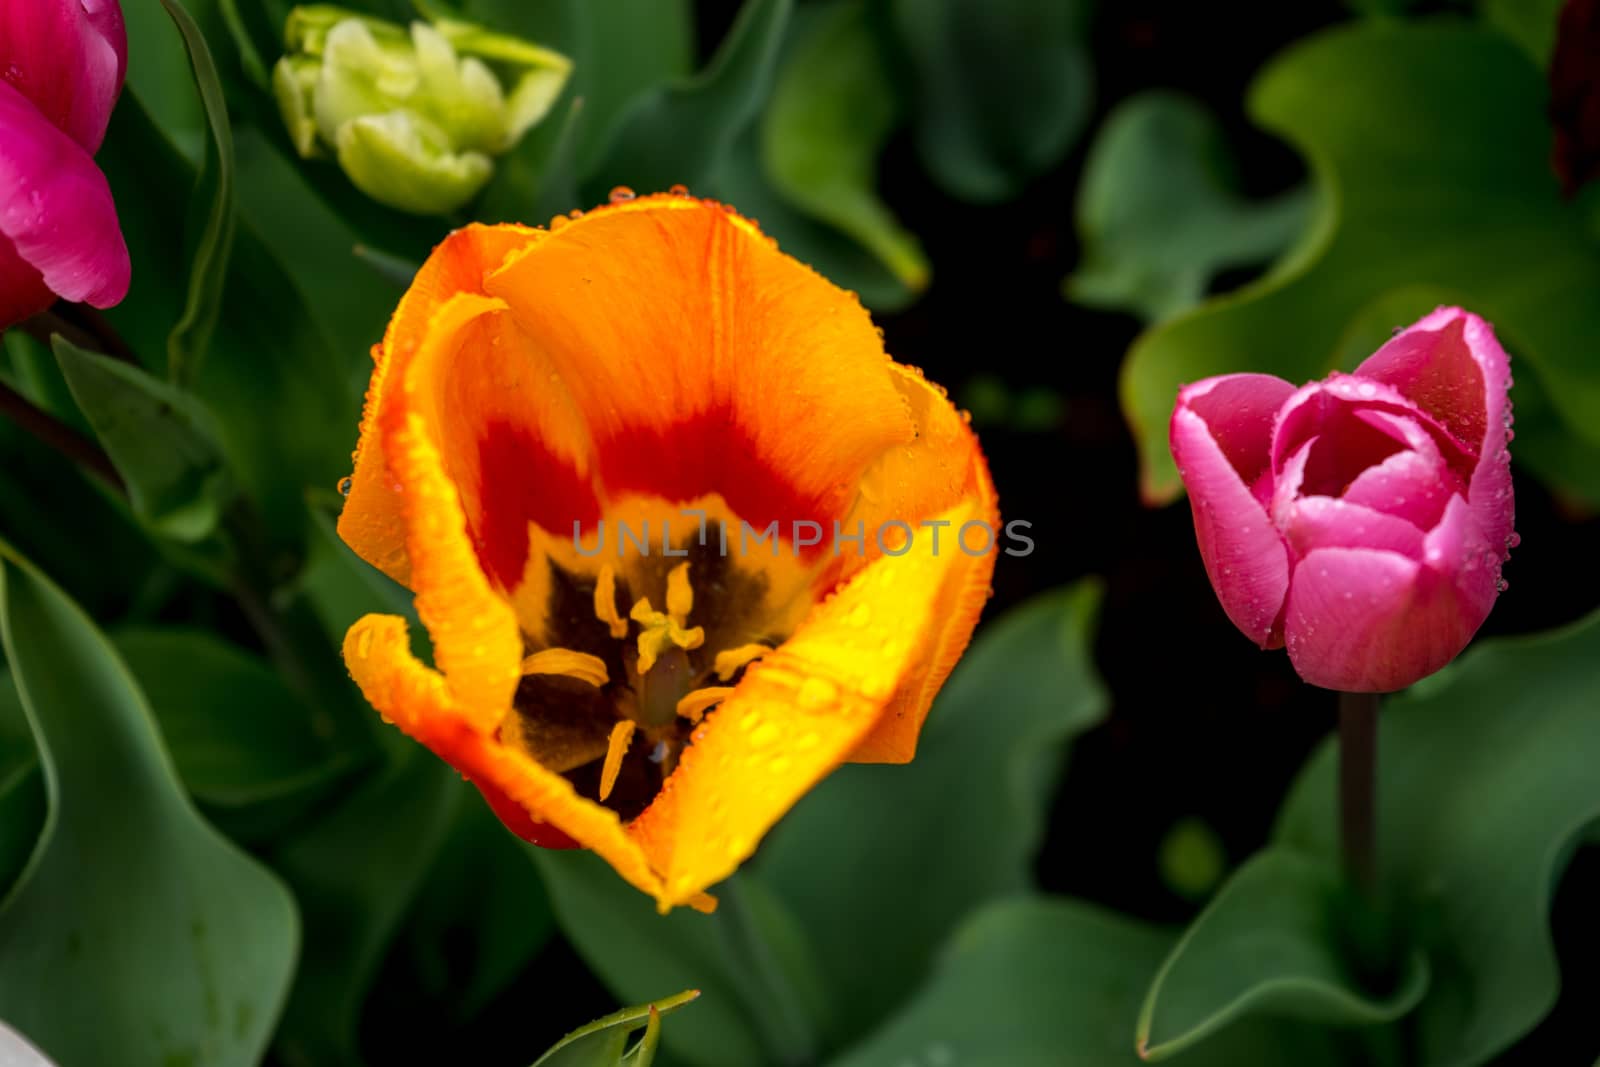 Beautiful colourful tulip flowers with beautiful background on a spring day